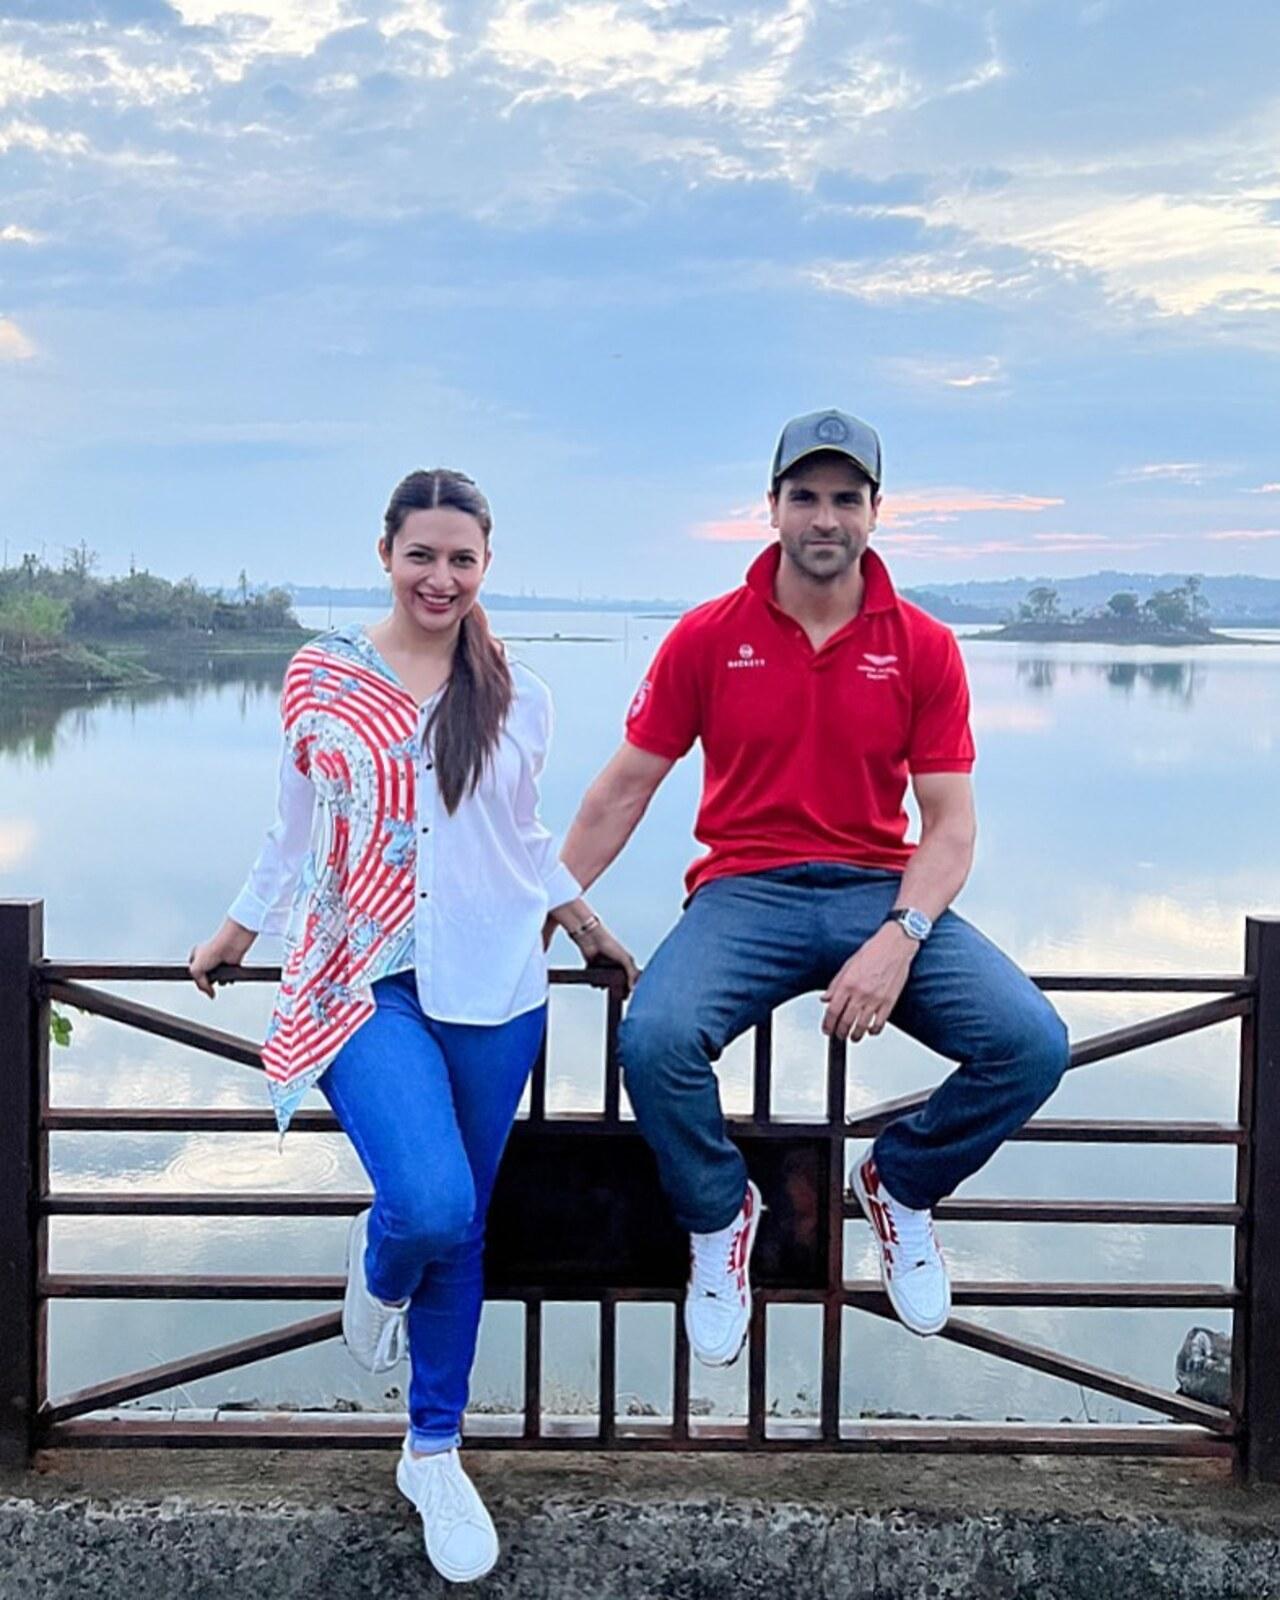 Divyanka Tripathi and Vivek Dahiya are renowned Indian television actors. They captured hearts with their on-screen chemistry 'Yeh Hai Mohabbatein' and later fell in love off-screen